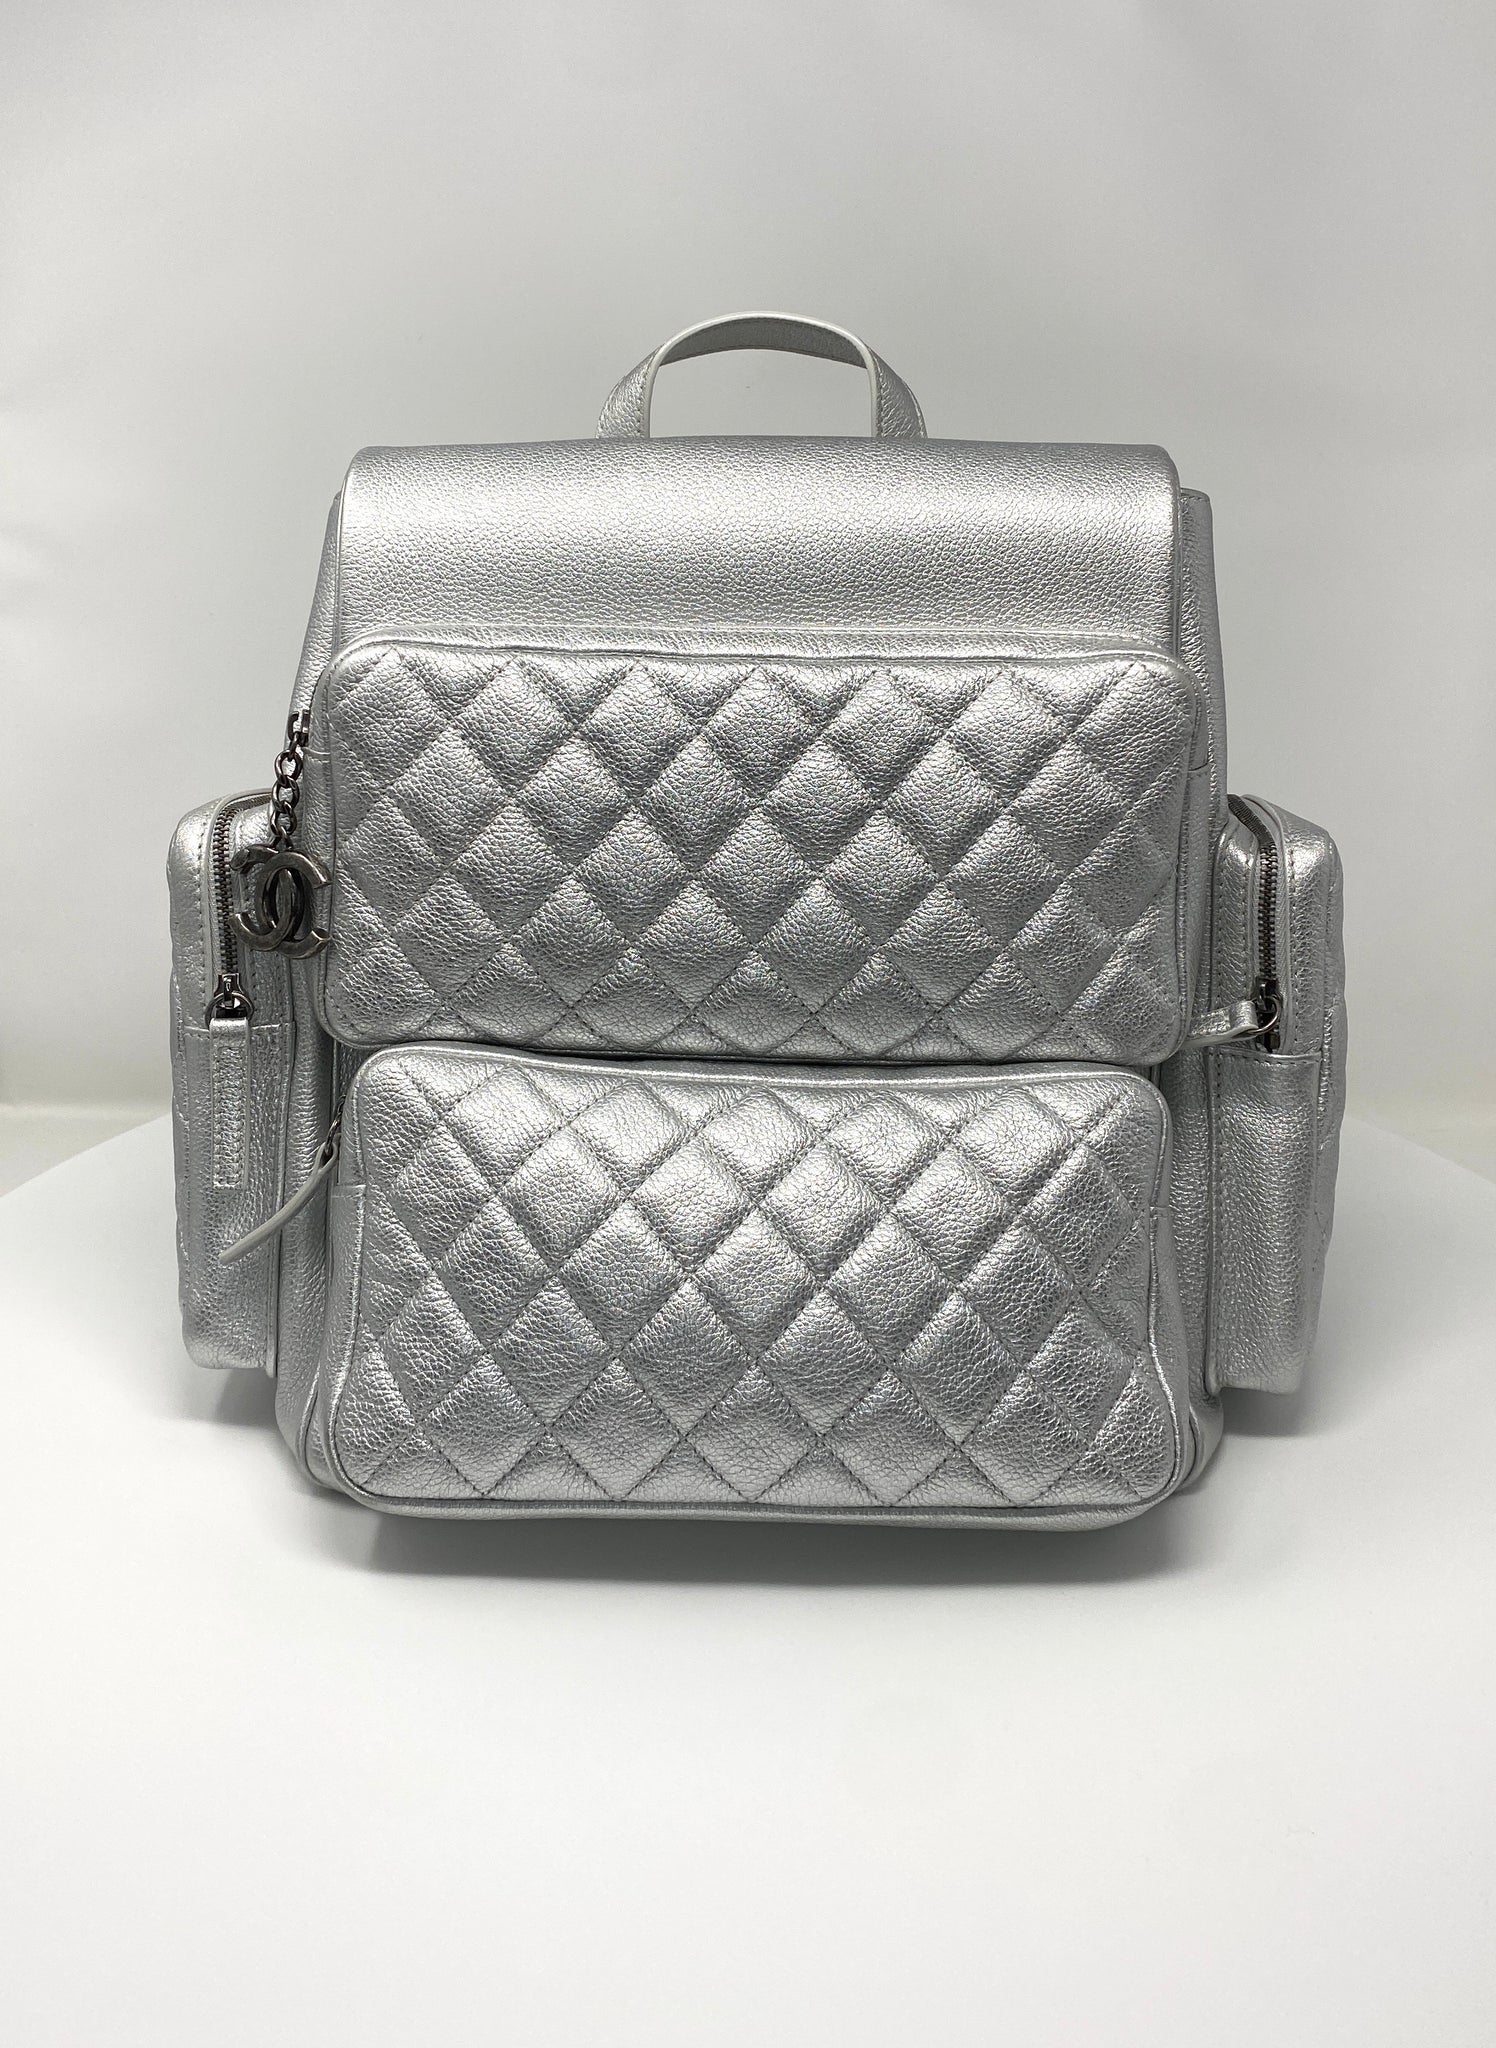 Chanel Black Quilted Lambskin Backpack - Vintage Lux